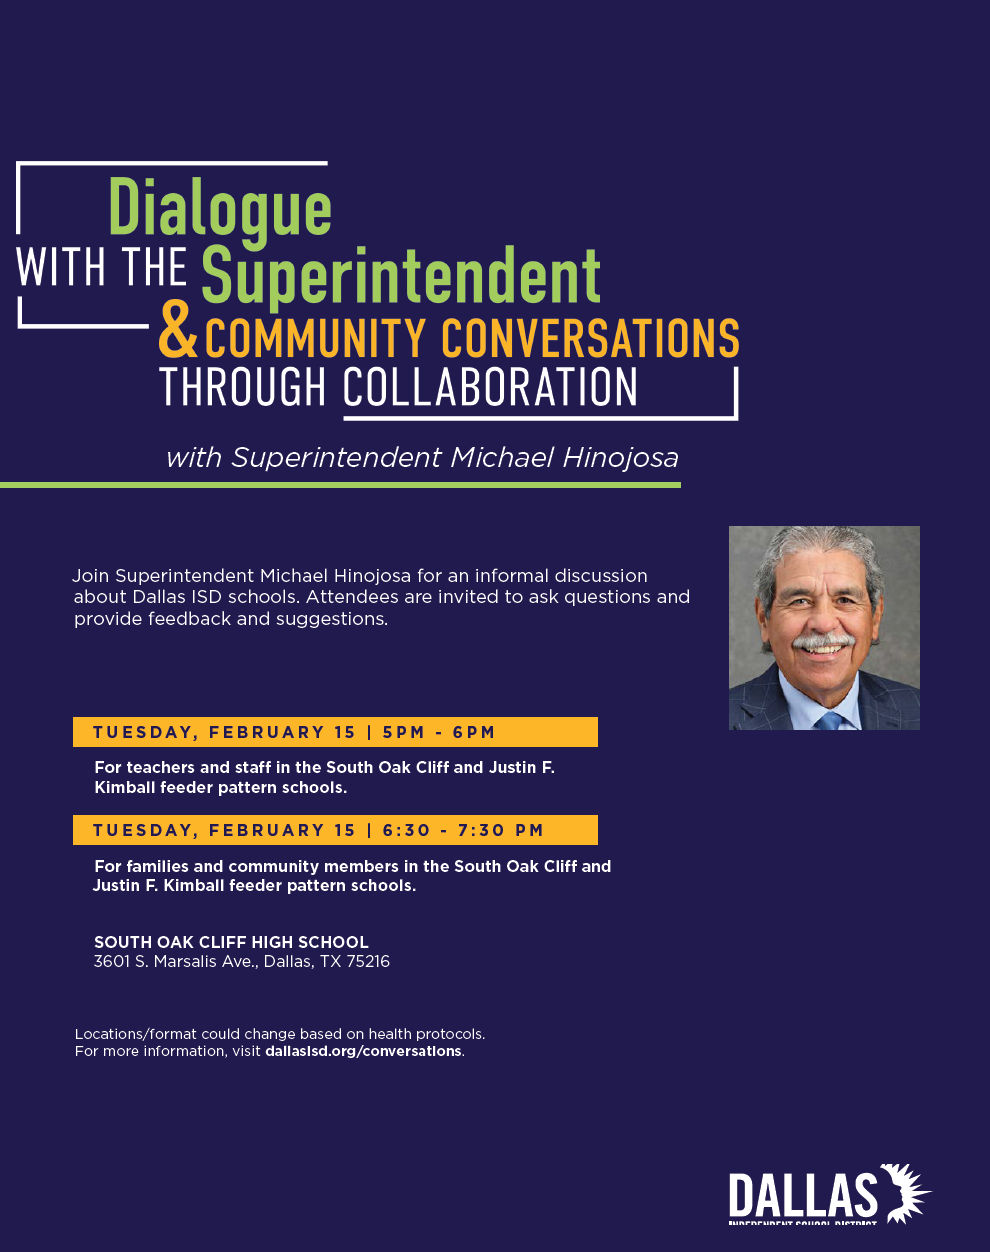  Dialogue with the Superintendent  on February 15th